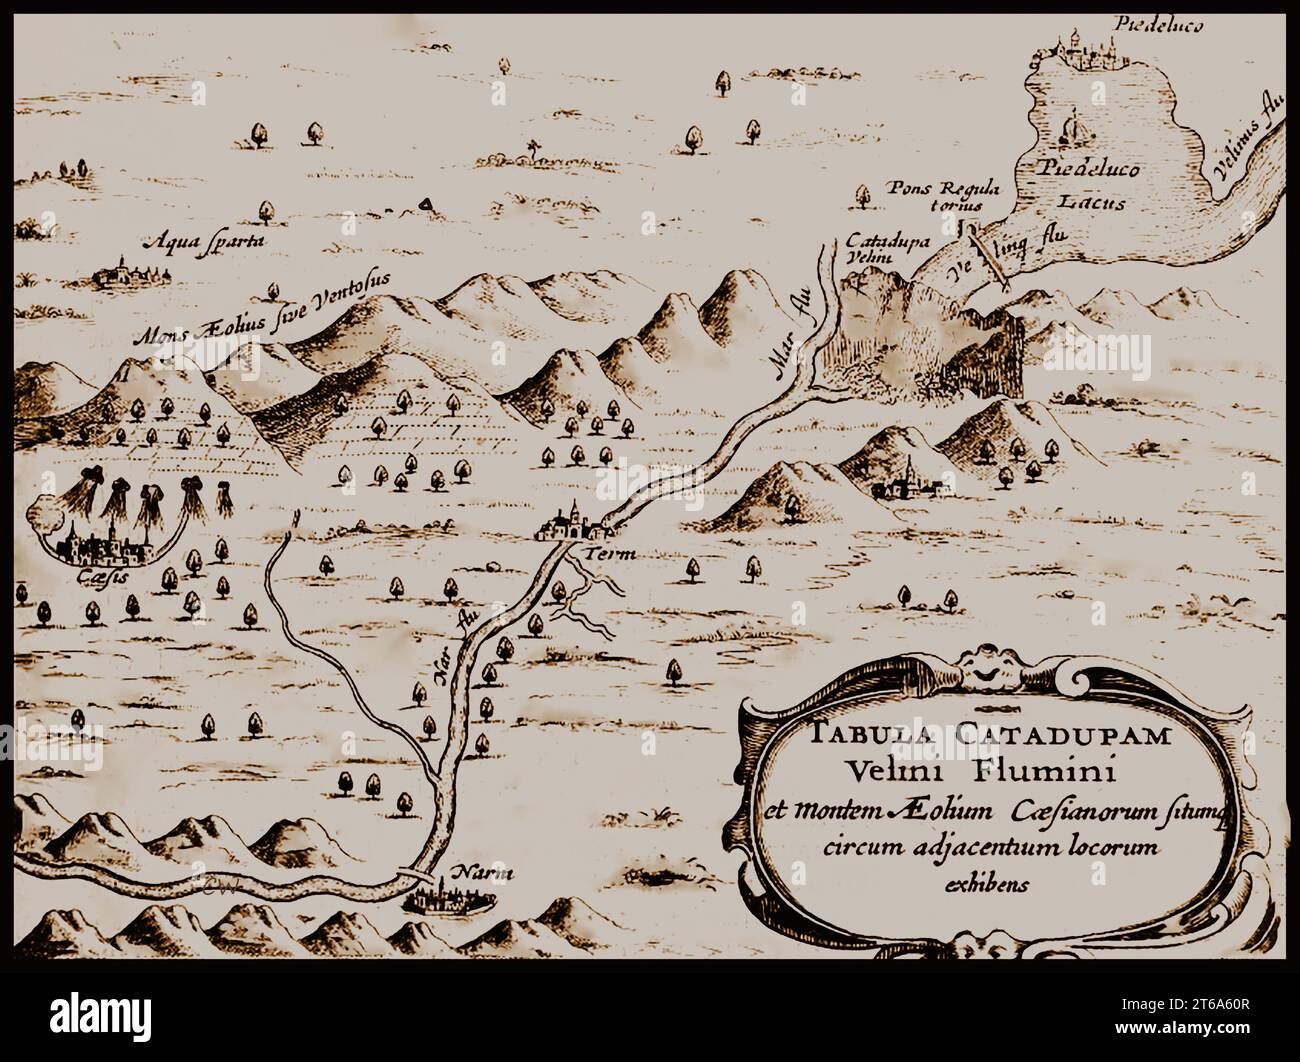 1665 a map showing the location of the  Catadupa Velini  (Velino) river valley and the Aeolian mountains.  ---  1665 una mappa che mostra l'ubicazione della valle del fiume Catadupa Velini (Velino) e delle montagne Eolie. Stock Photo